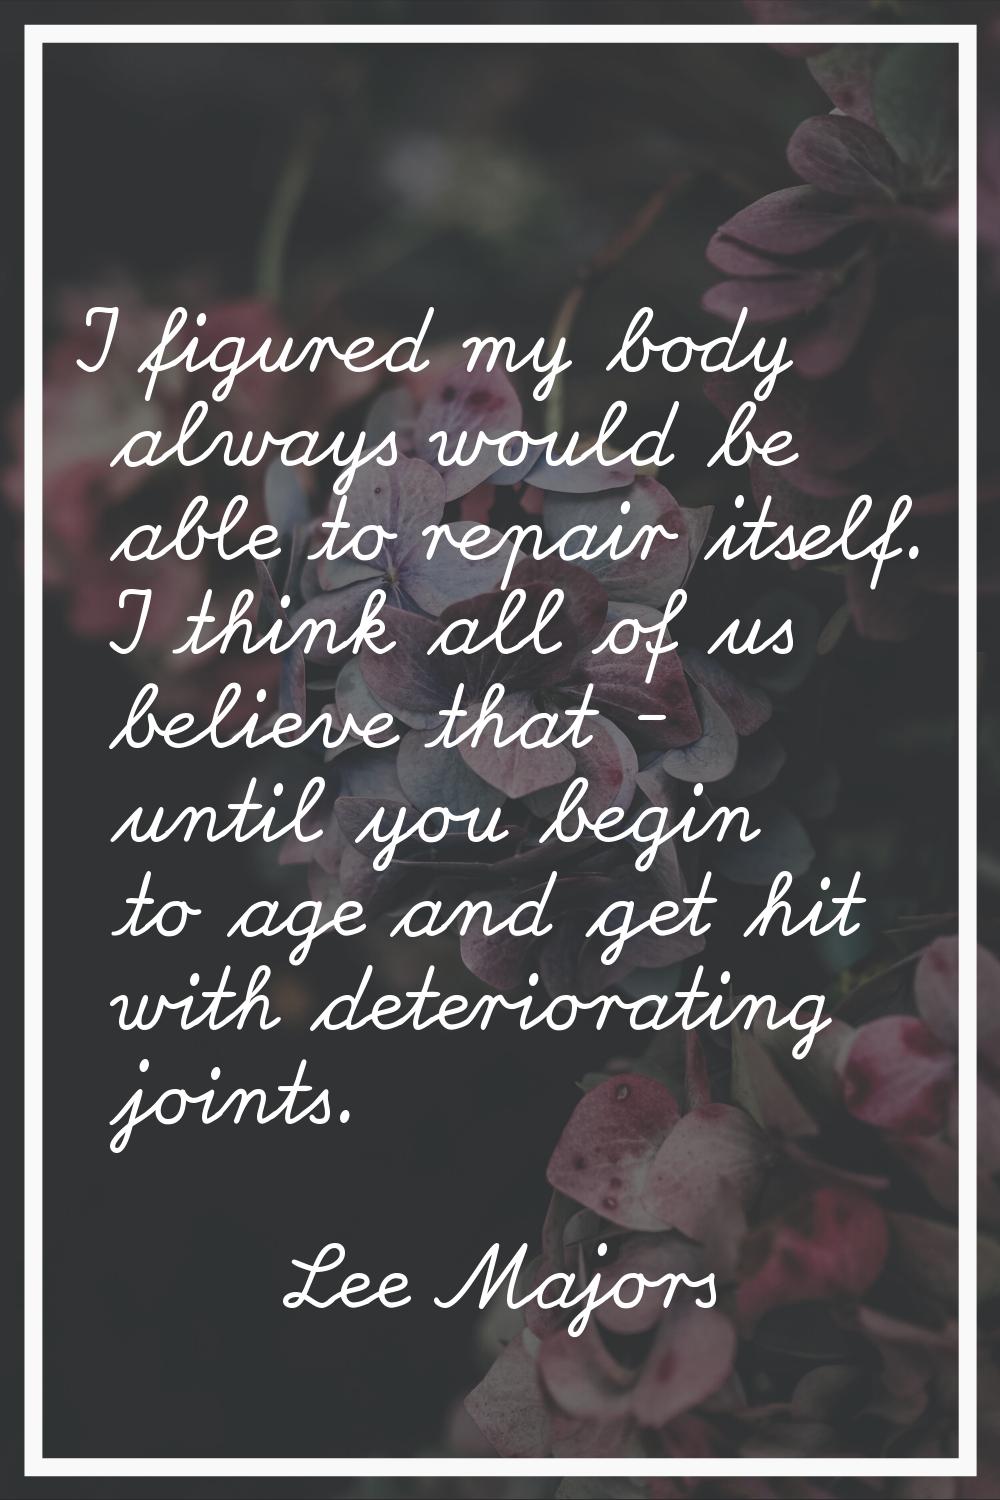 I figured my body always would be able to repair itself. I think all of us believe that - until you